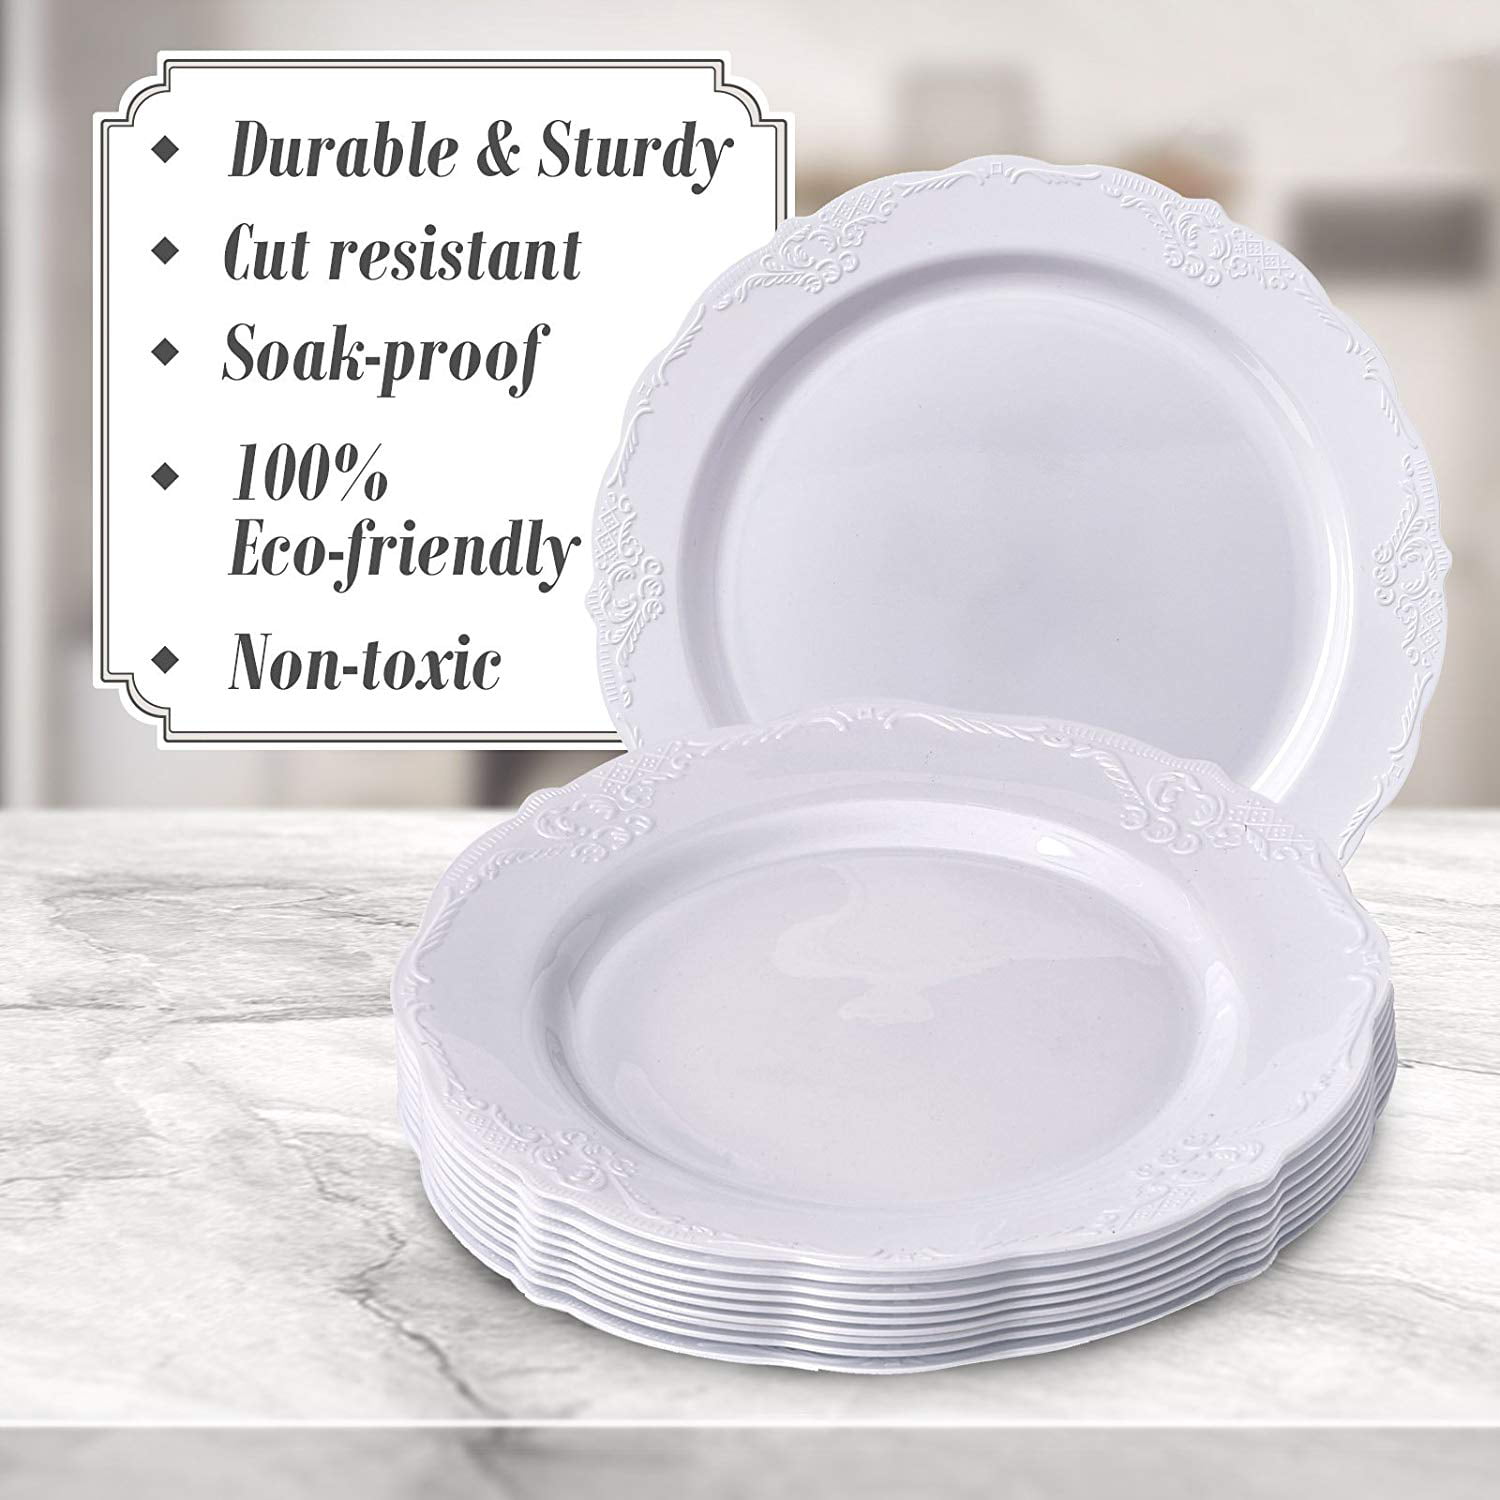 Party Disposable 20 pc Dinnerware Set Heavyweight Plastic Dishes 20 Dessert Plates for Upscale Wedding and Dining Elegant Fine China Look Vintage Collection – Cream | 7.5 Inch